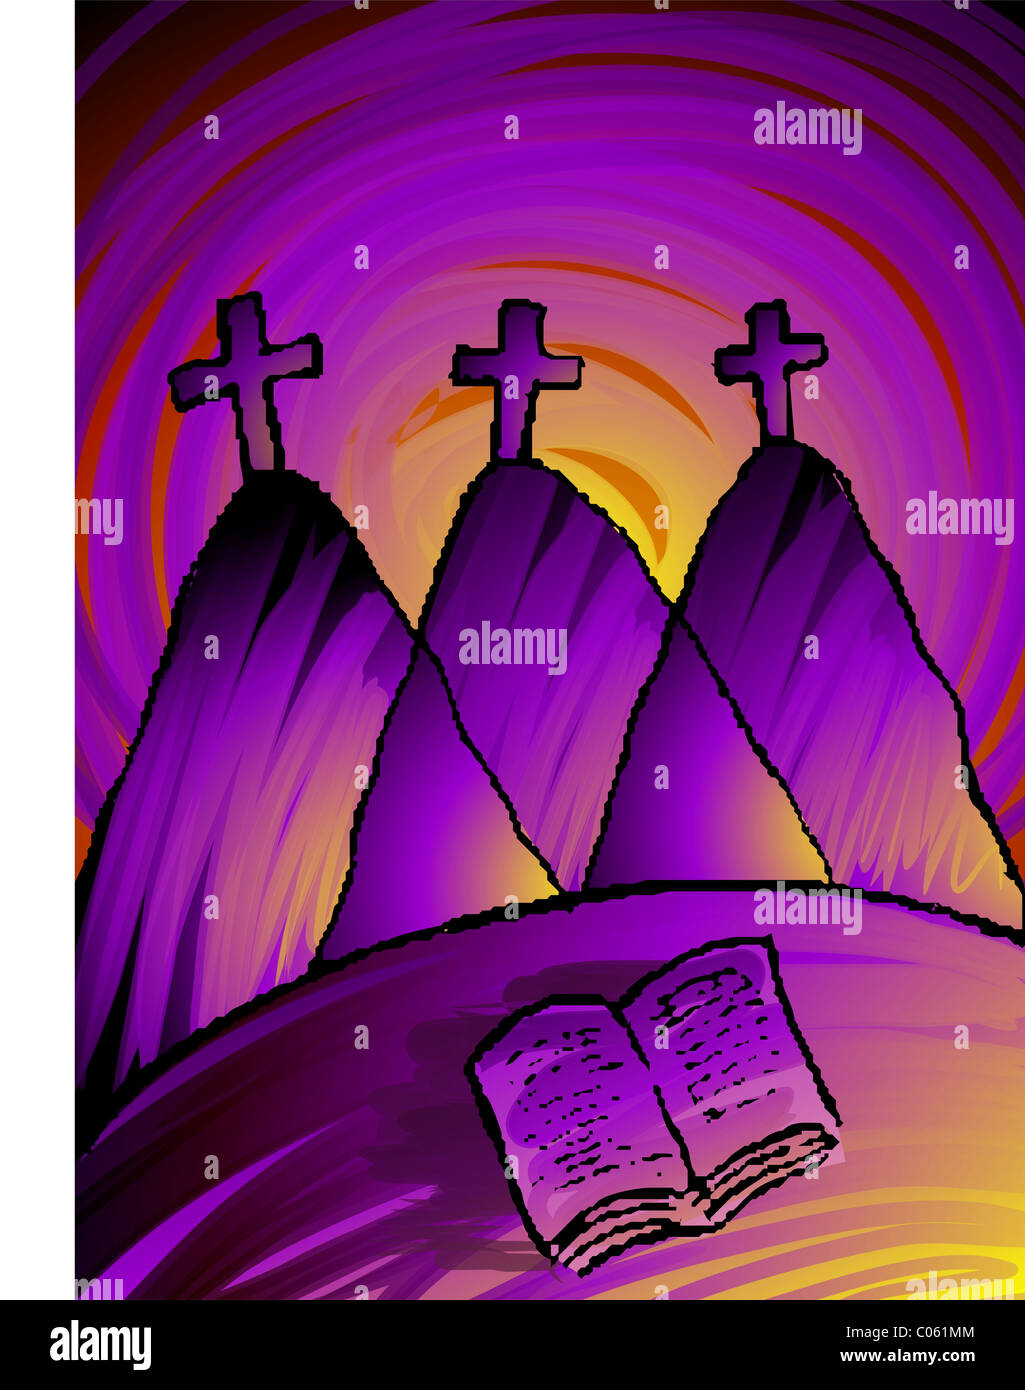 Digital painting of church in a colour background. The artist is feeling the sense of worship and holiness. Stock Photo